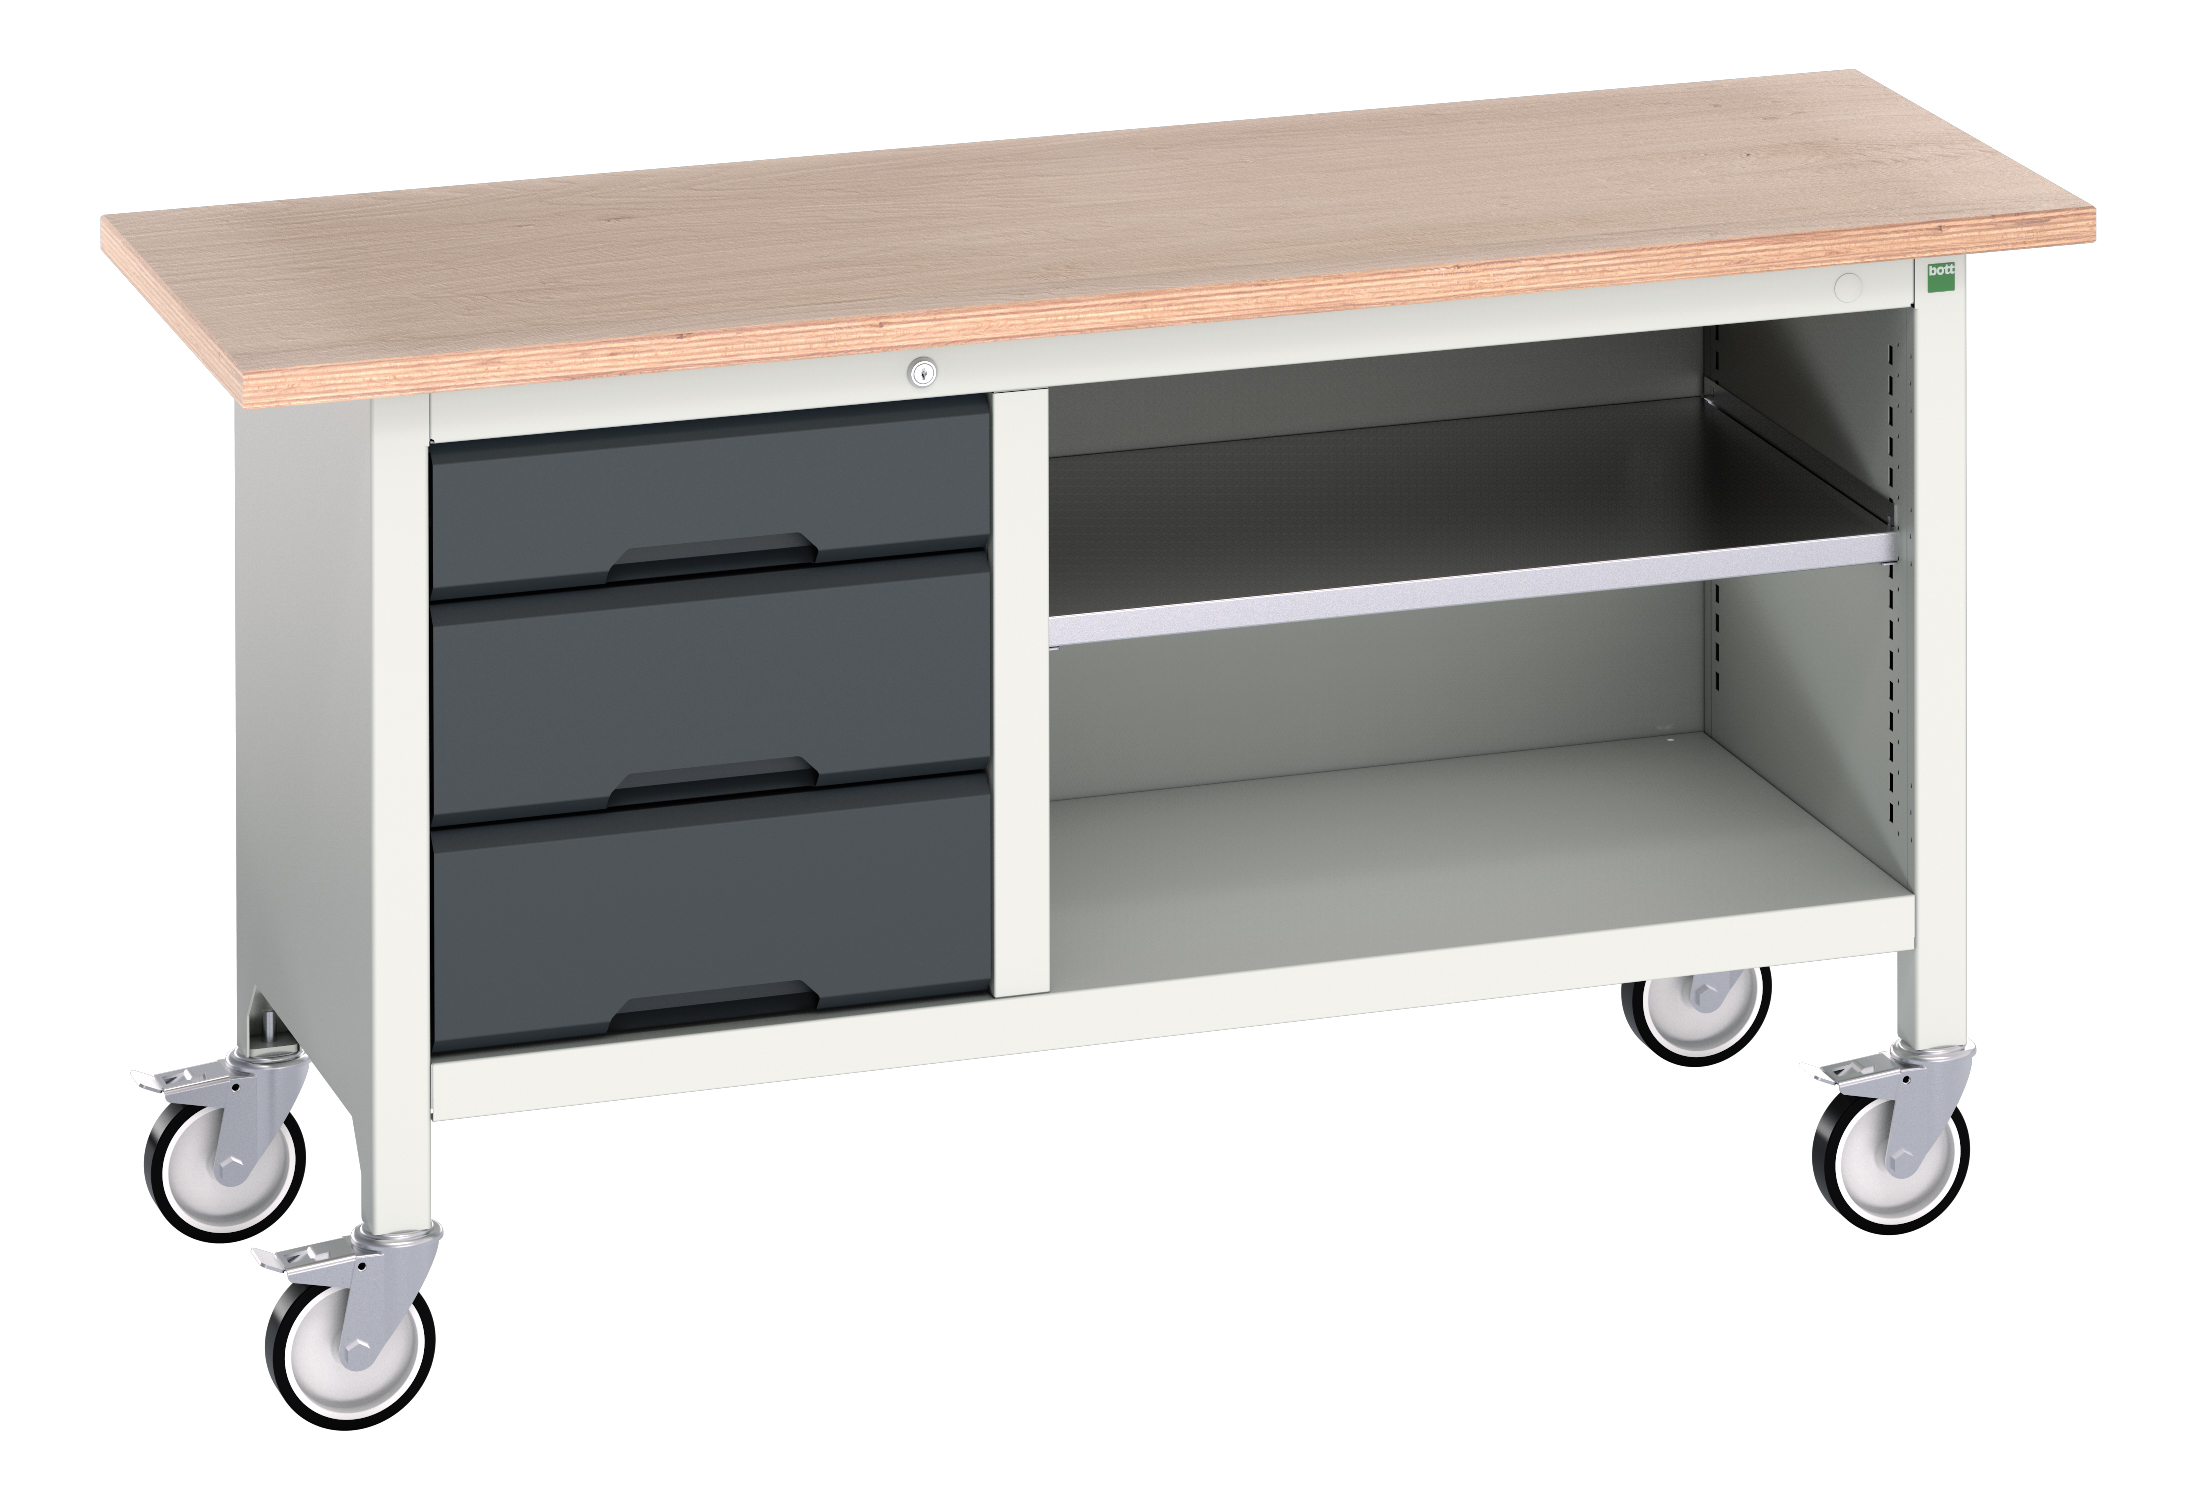 Bott Verso Mobile Storage Bench With 3 Drawer Cabinet / Open Cupboard - 16923212.19